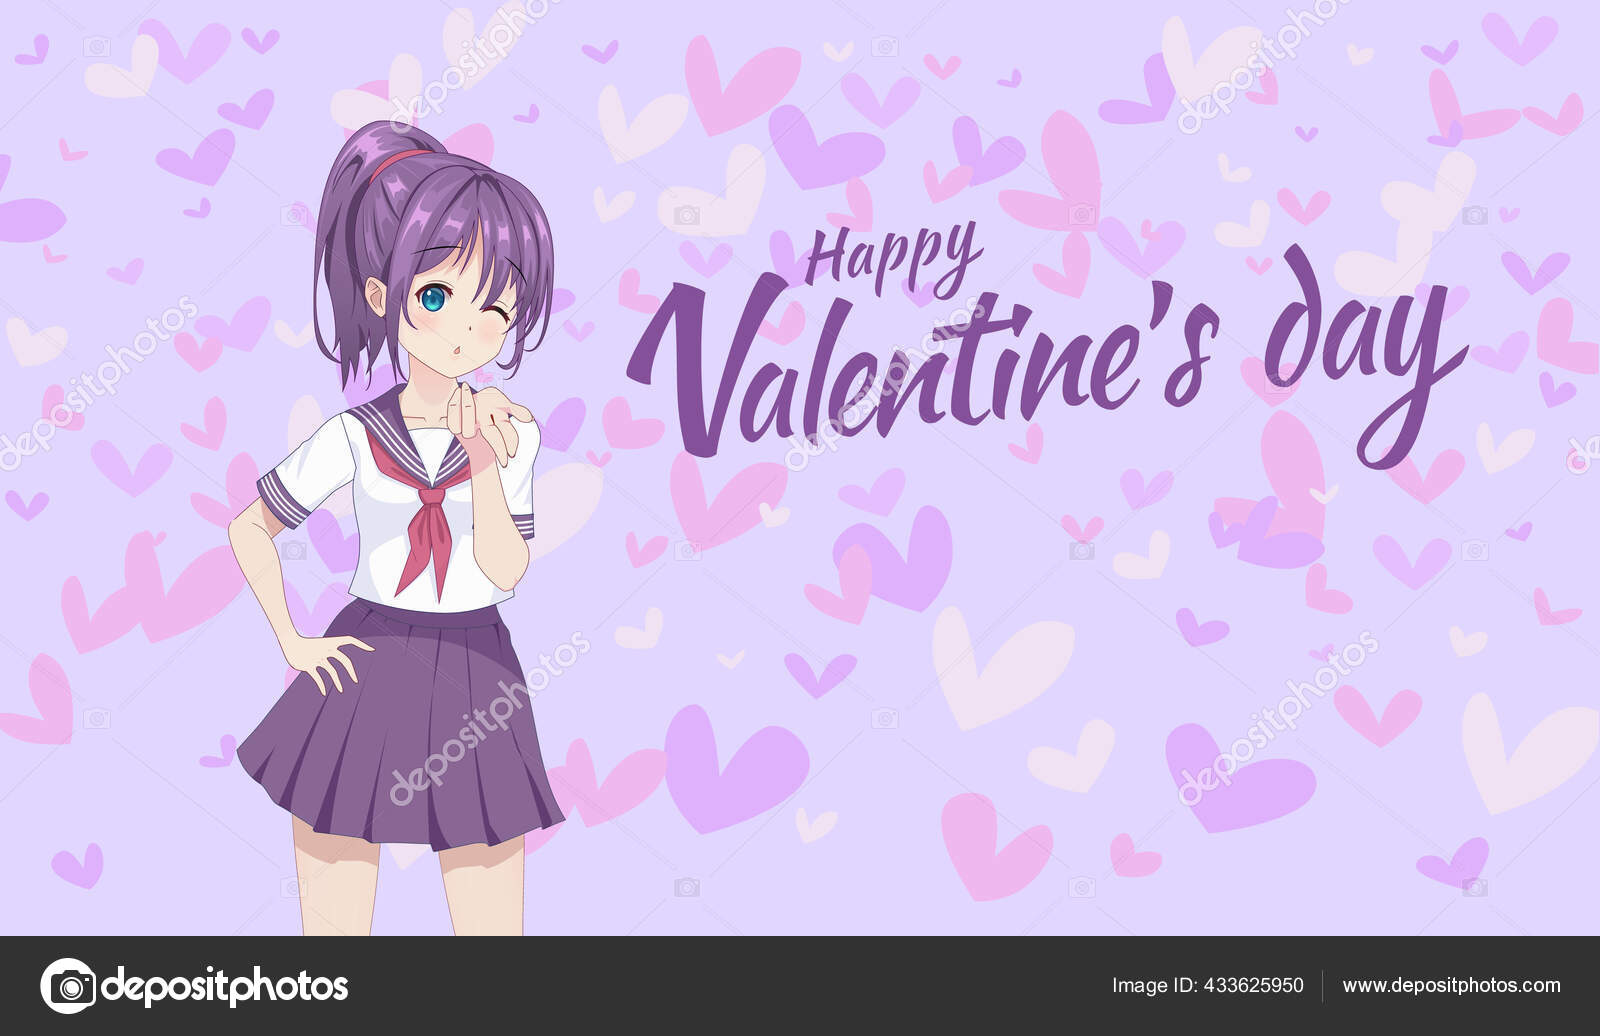 Amazon.com: An Anime Valentine (Journals For Every Occasion):  9781660208005: Faw, Susan, Faw, Susan: Books